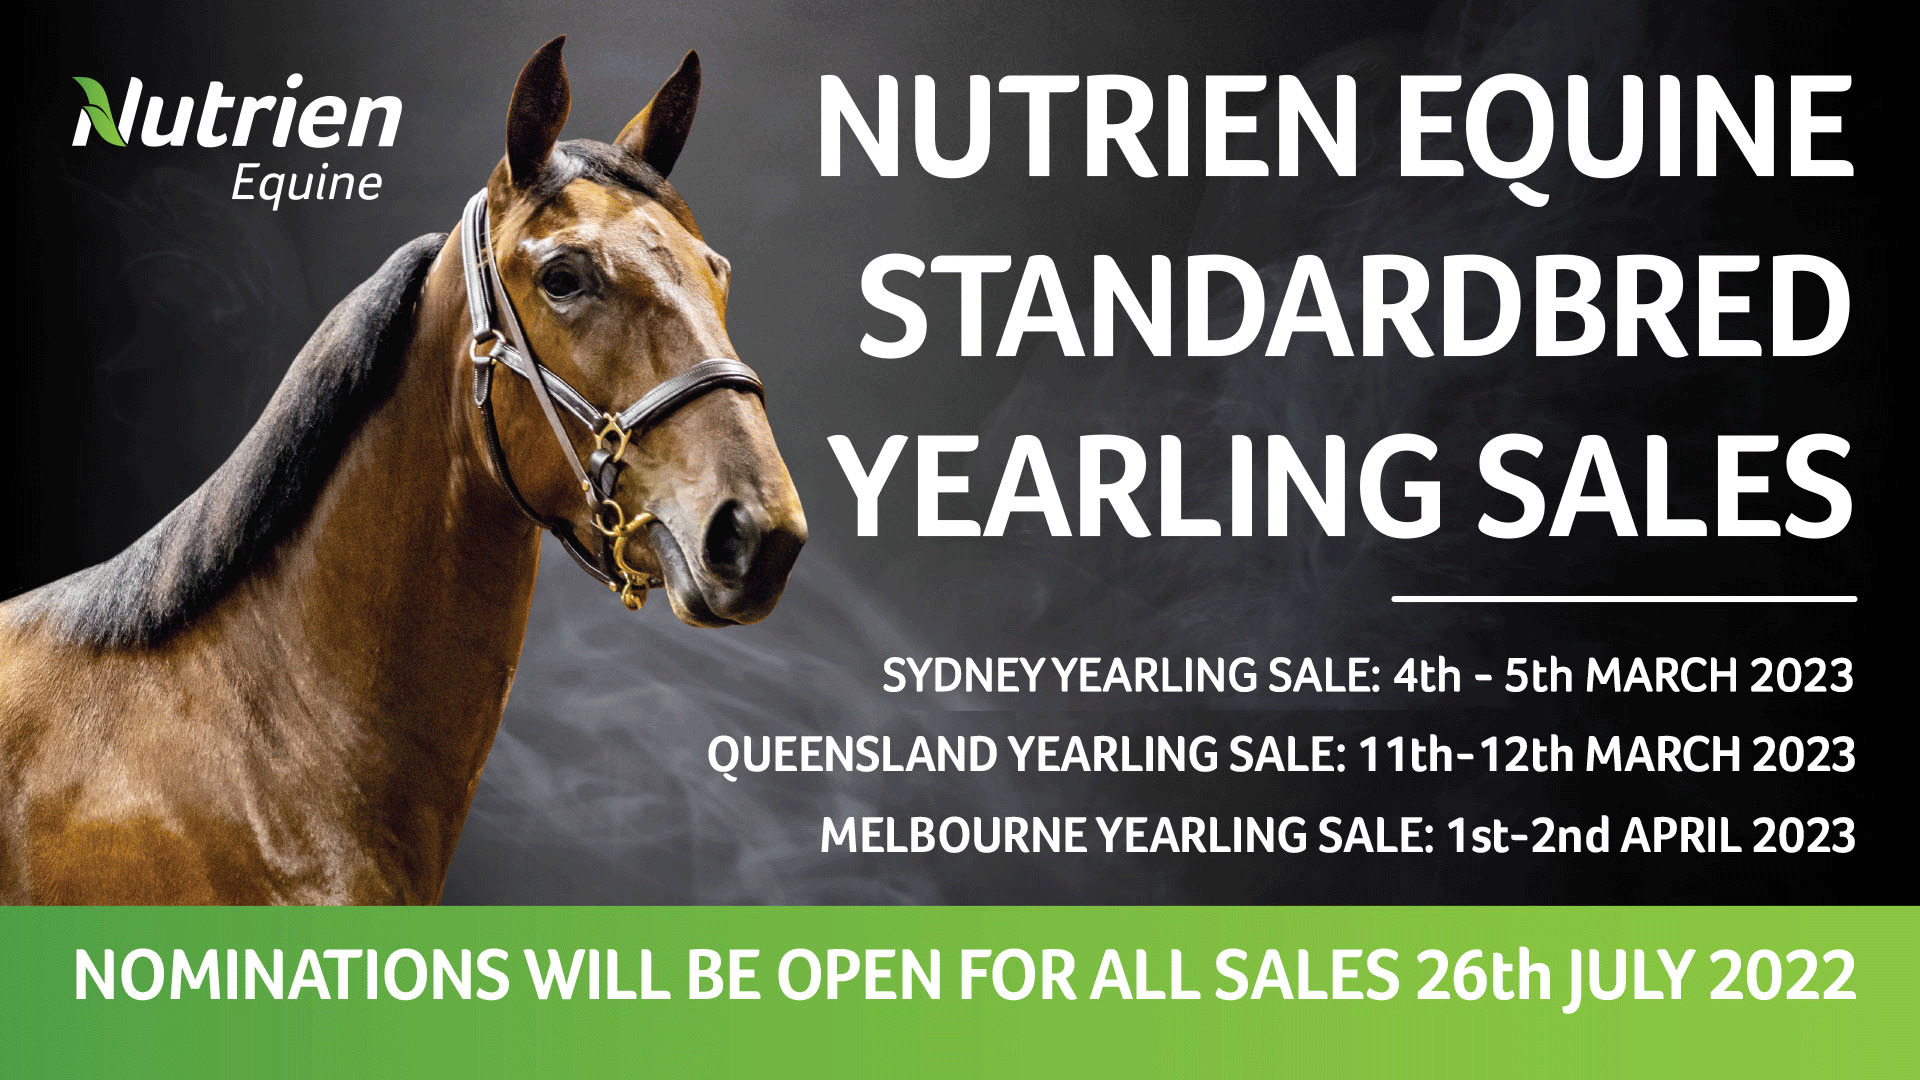 CONTINUED GROWTH TO THE NORTH FOR NUTRIEN EQUINE